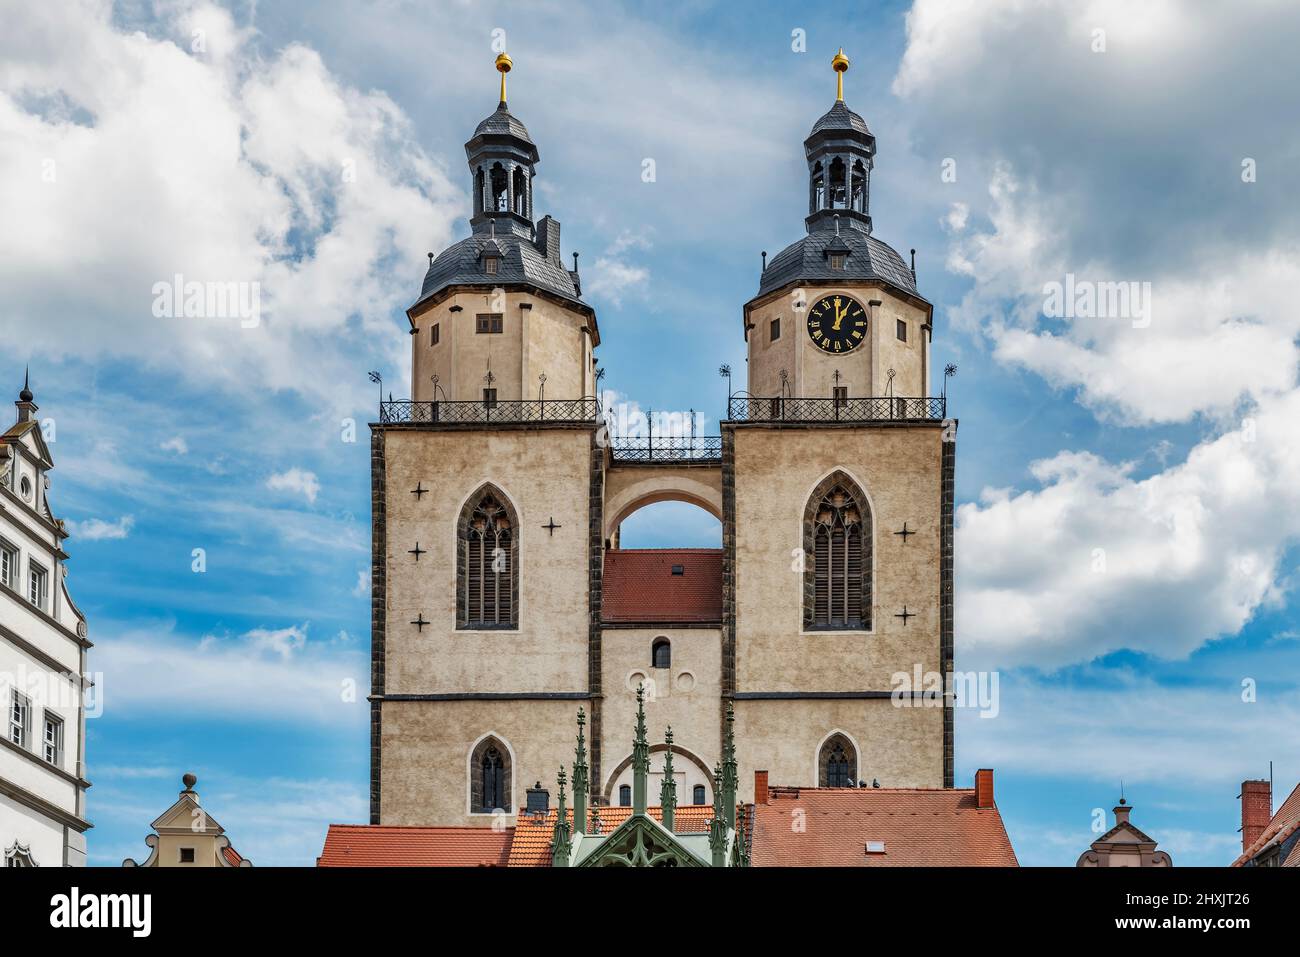 View over the Wittenberg market square to the St. Mary's Church, Lutherstadt Wittenberg, Saxony-Anhalt, Germany, Europe Stock Photo